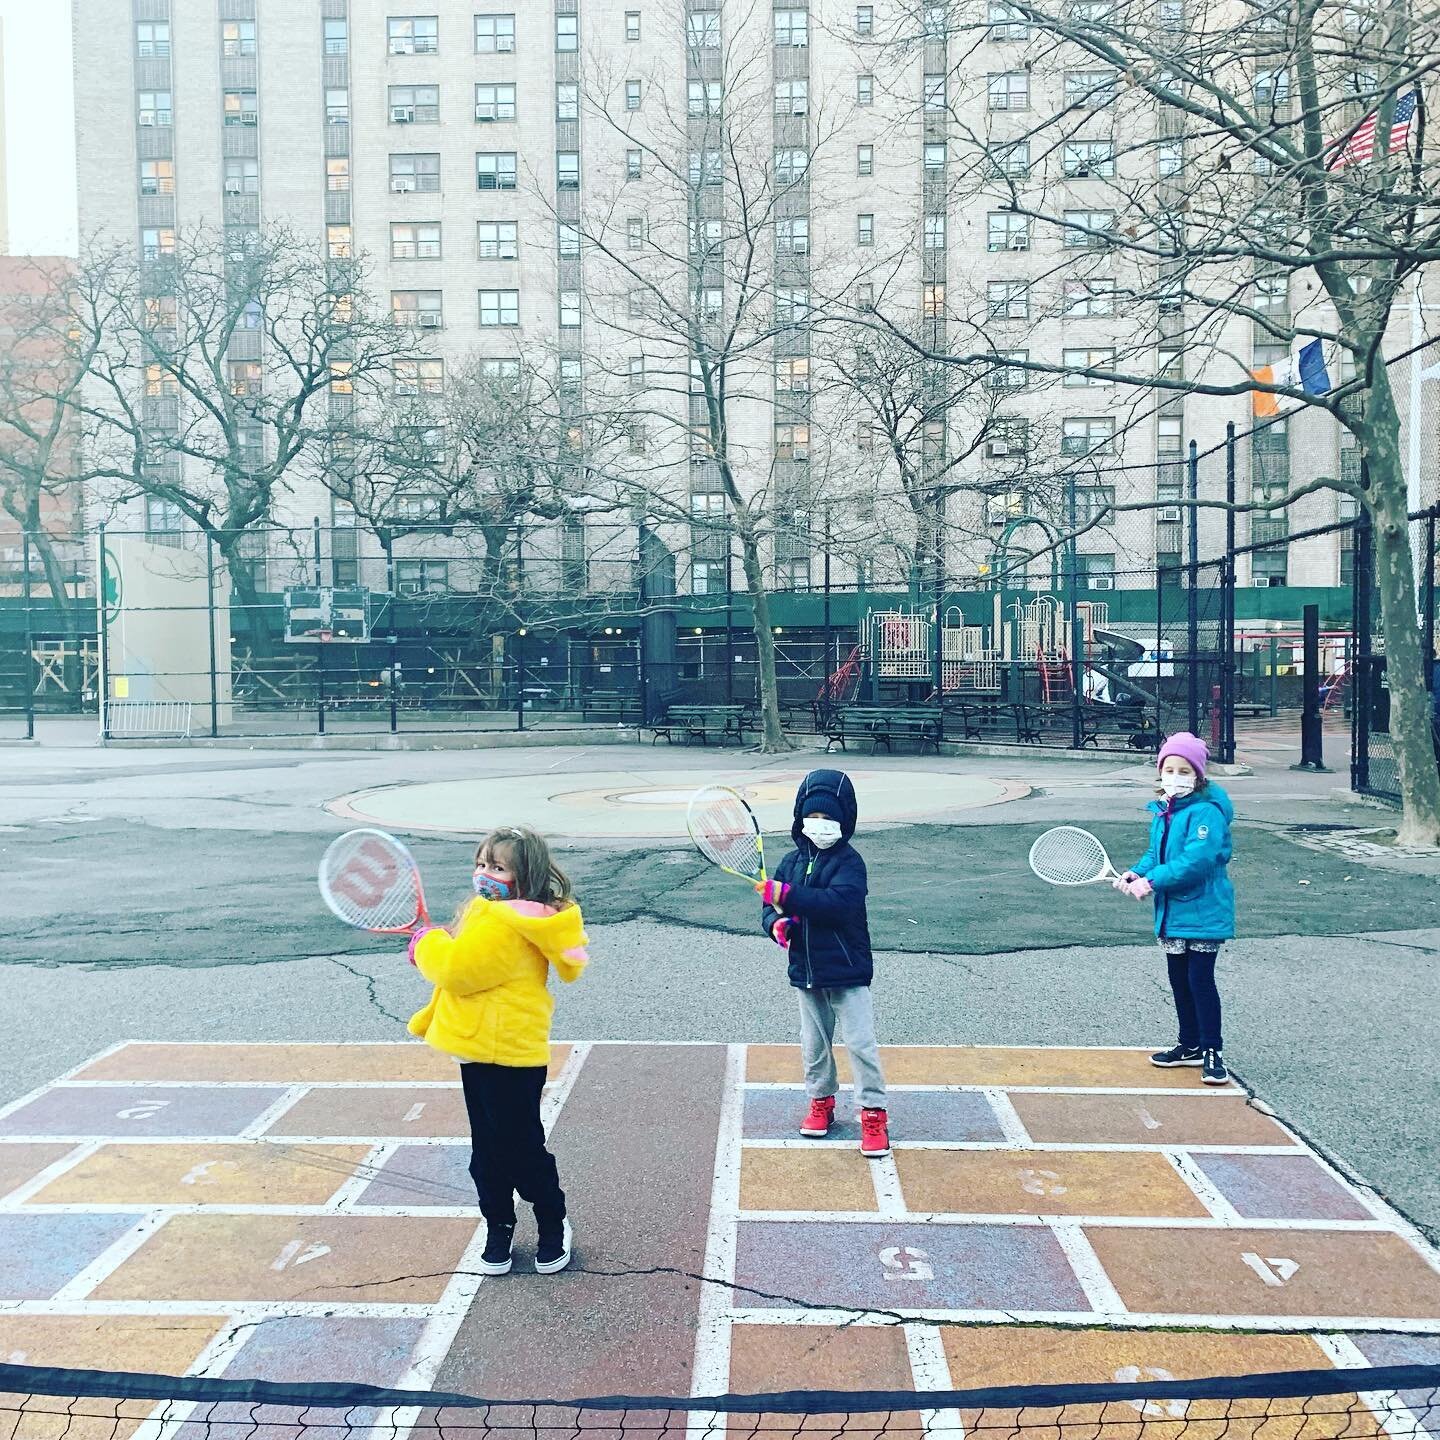 We&rsquo;re all in this together! Cooperation is a big part of our classes. #uws #uwsnyc #uwsnycmom #kidstennis #kidstennislessons #activitiesfortoddlers  #afterschoolactivitiesforkids